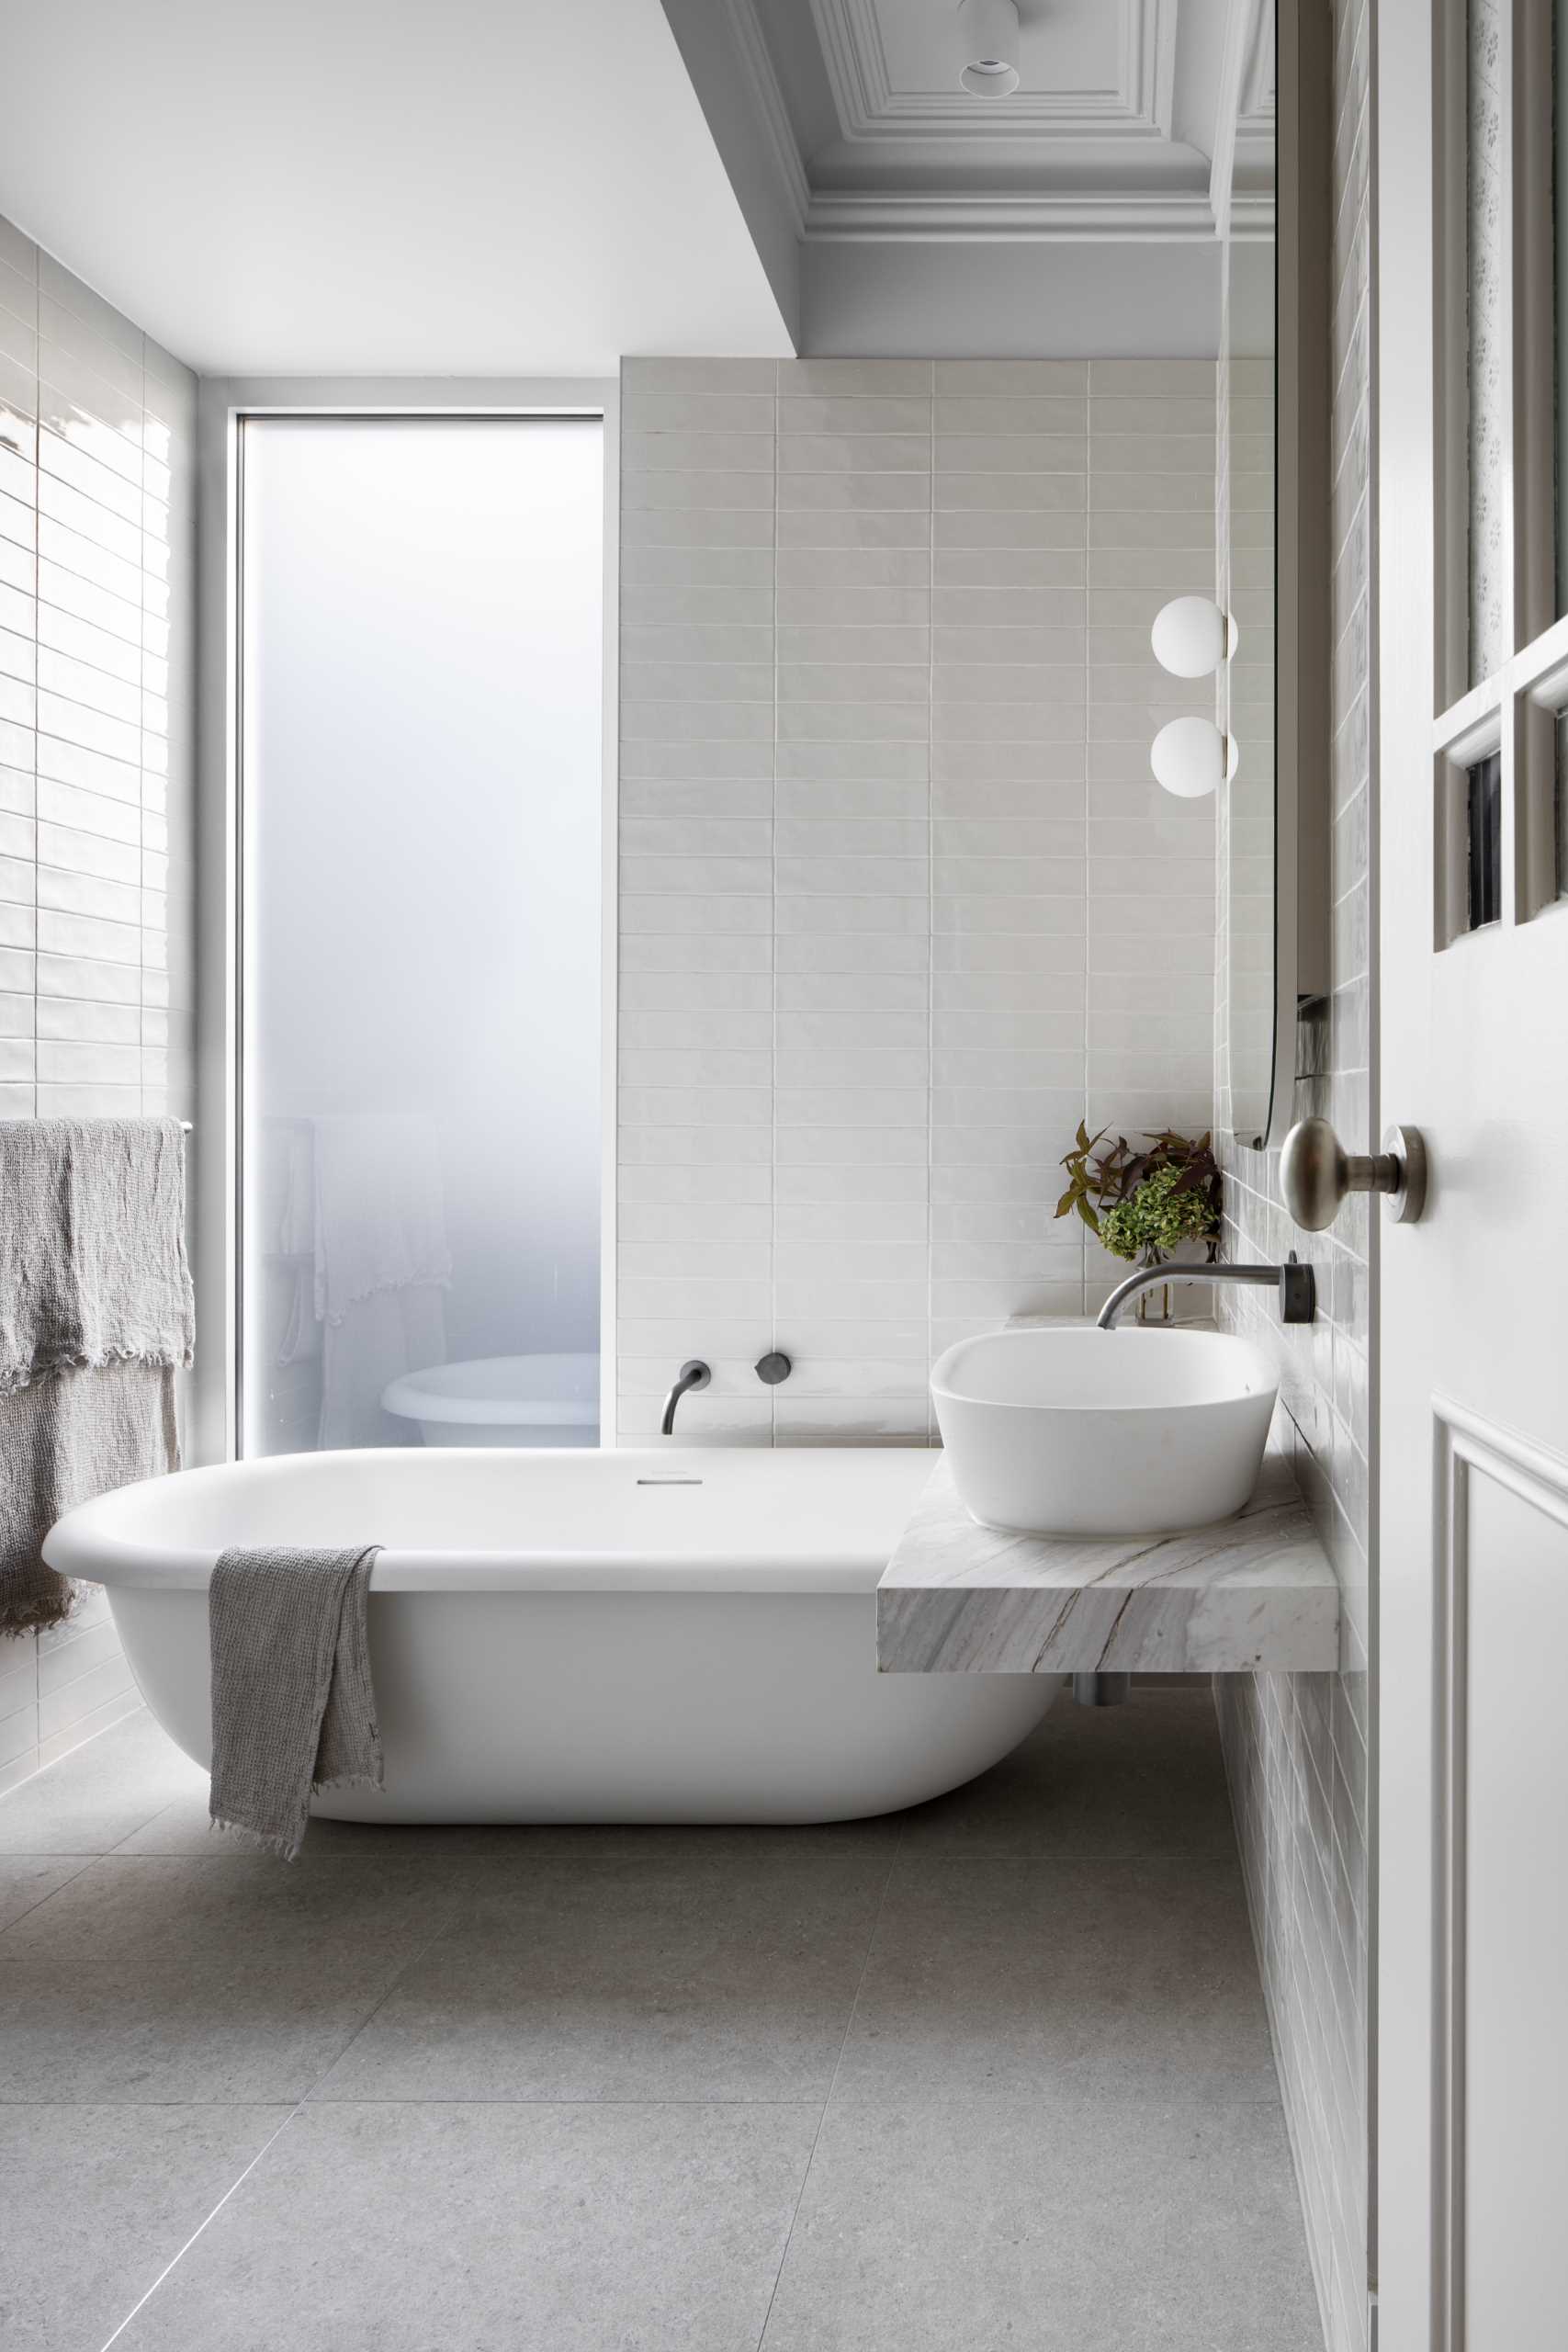 In this bathroom, there's a floating vanity and freestanding bathtub, while an opaque window provides privacy and at the same time, allows the light to filter through.